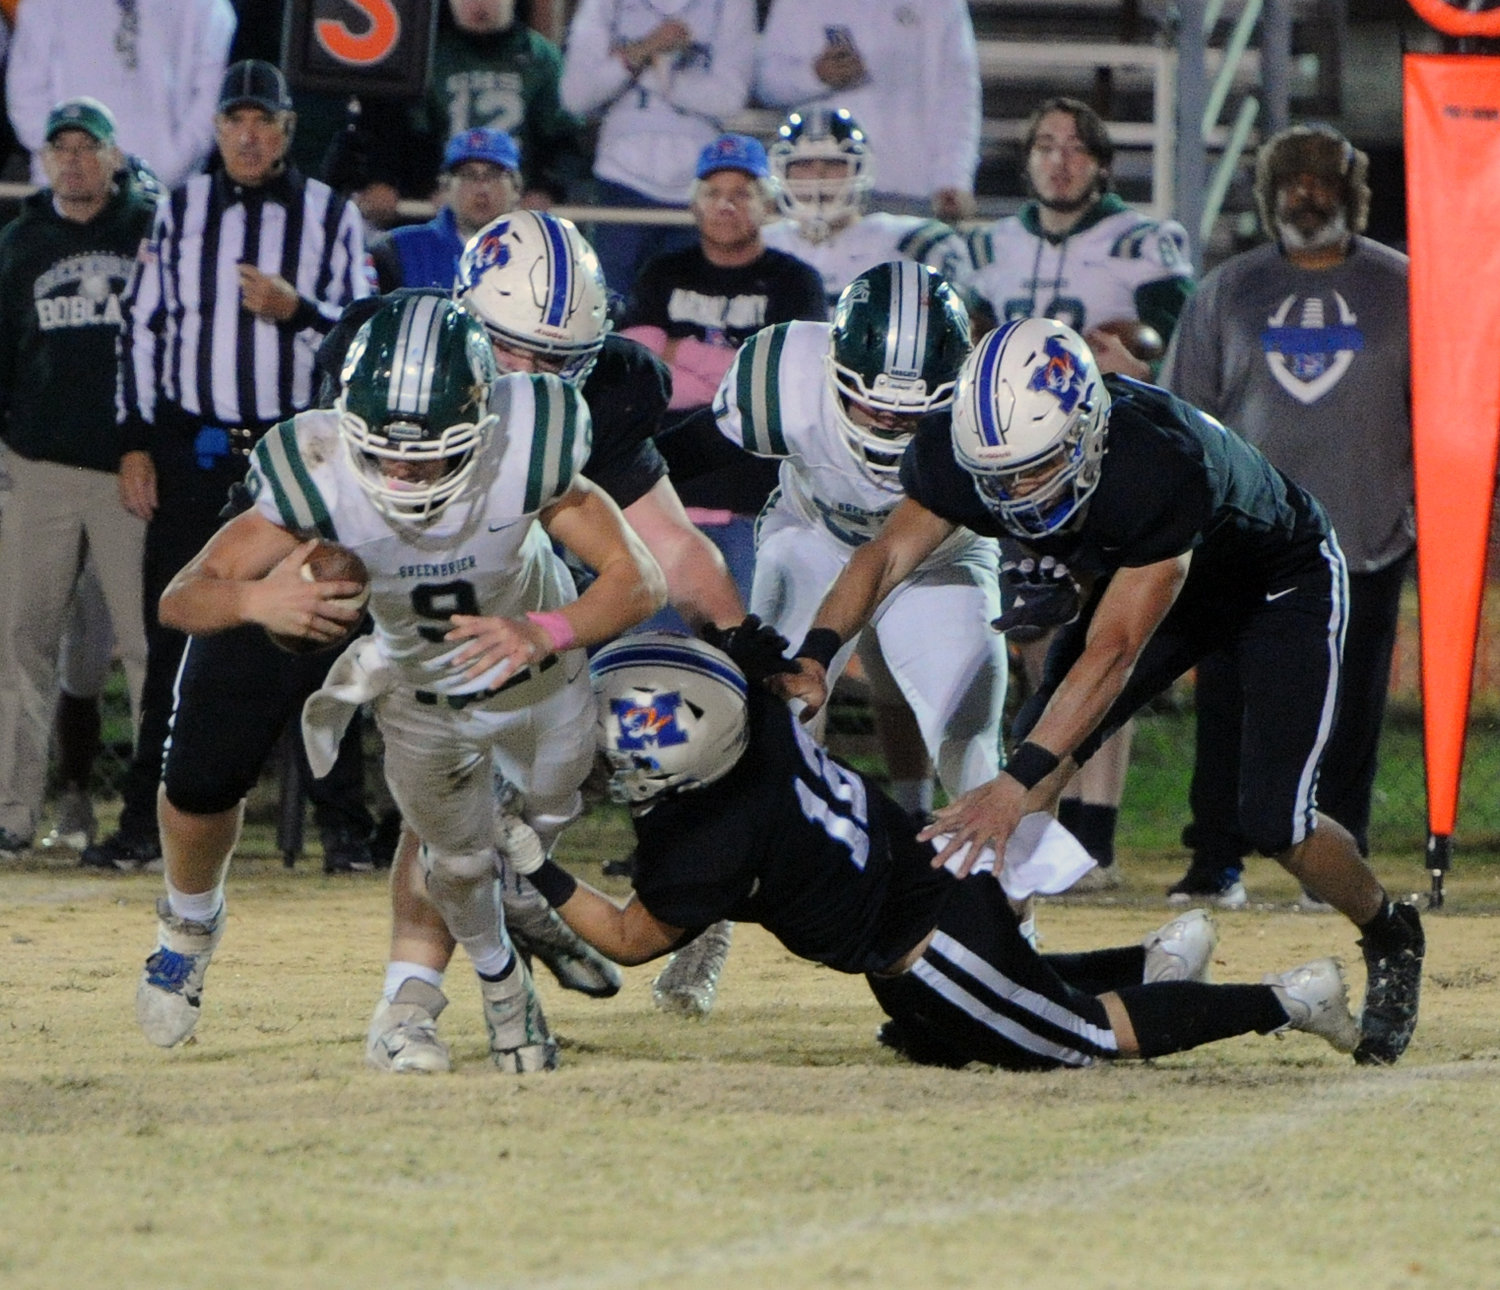 A host of Tiger defenders bring down Bobcat quarterback Nolan Carson for a loss in the backfield.